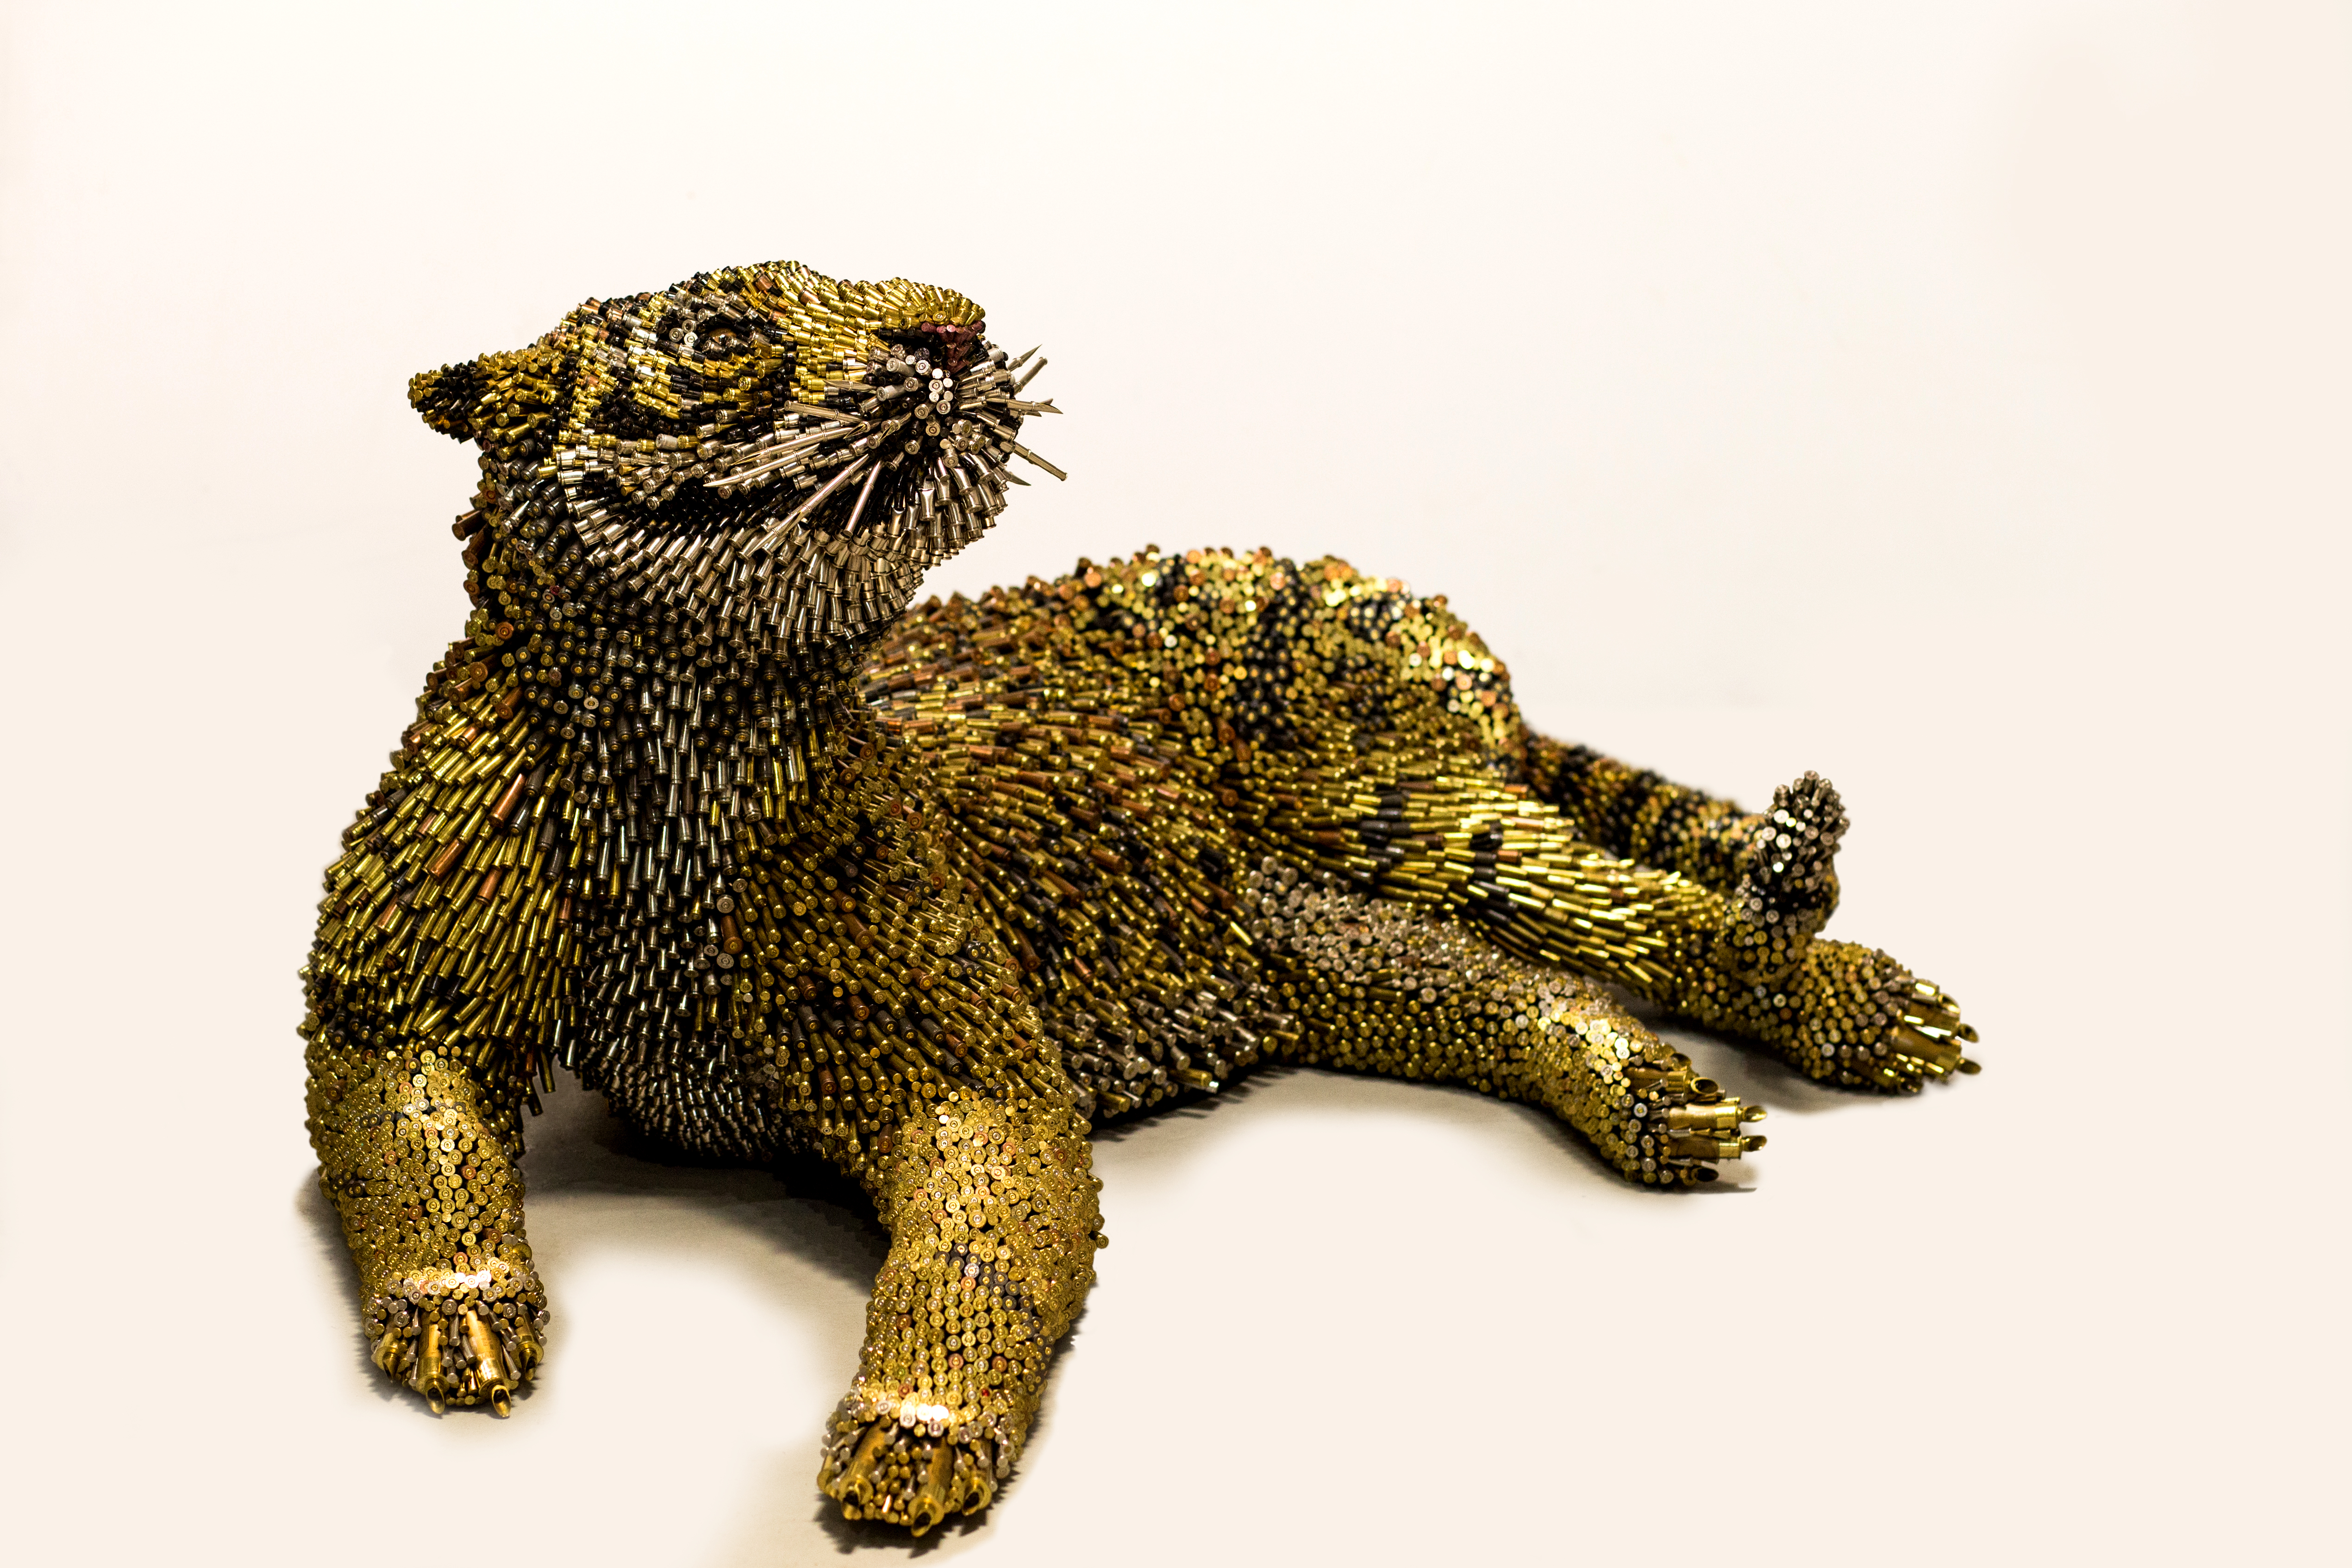 I'm an image! A tiger created by Federico Uribe from bullet shells.